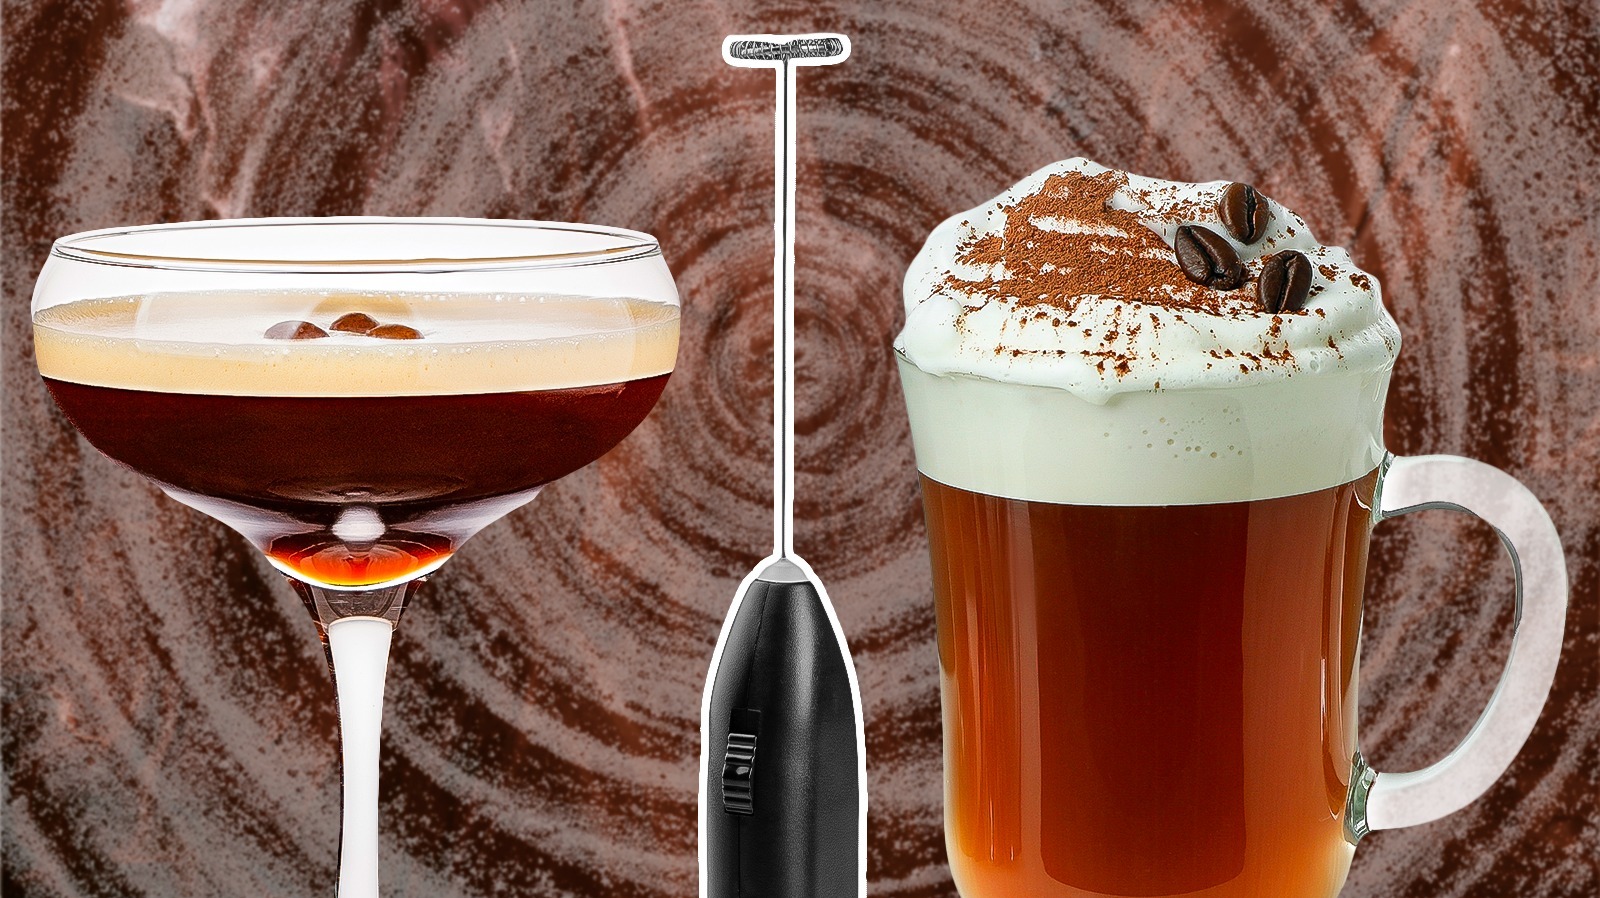 https://www.tastingtable.com/img/gallery/13-ways-to-elevate-your-favorite-boozy-drinks-with-a-milk-frother/l-intro-1701095477.jpg